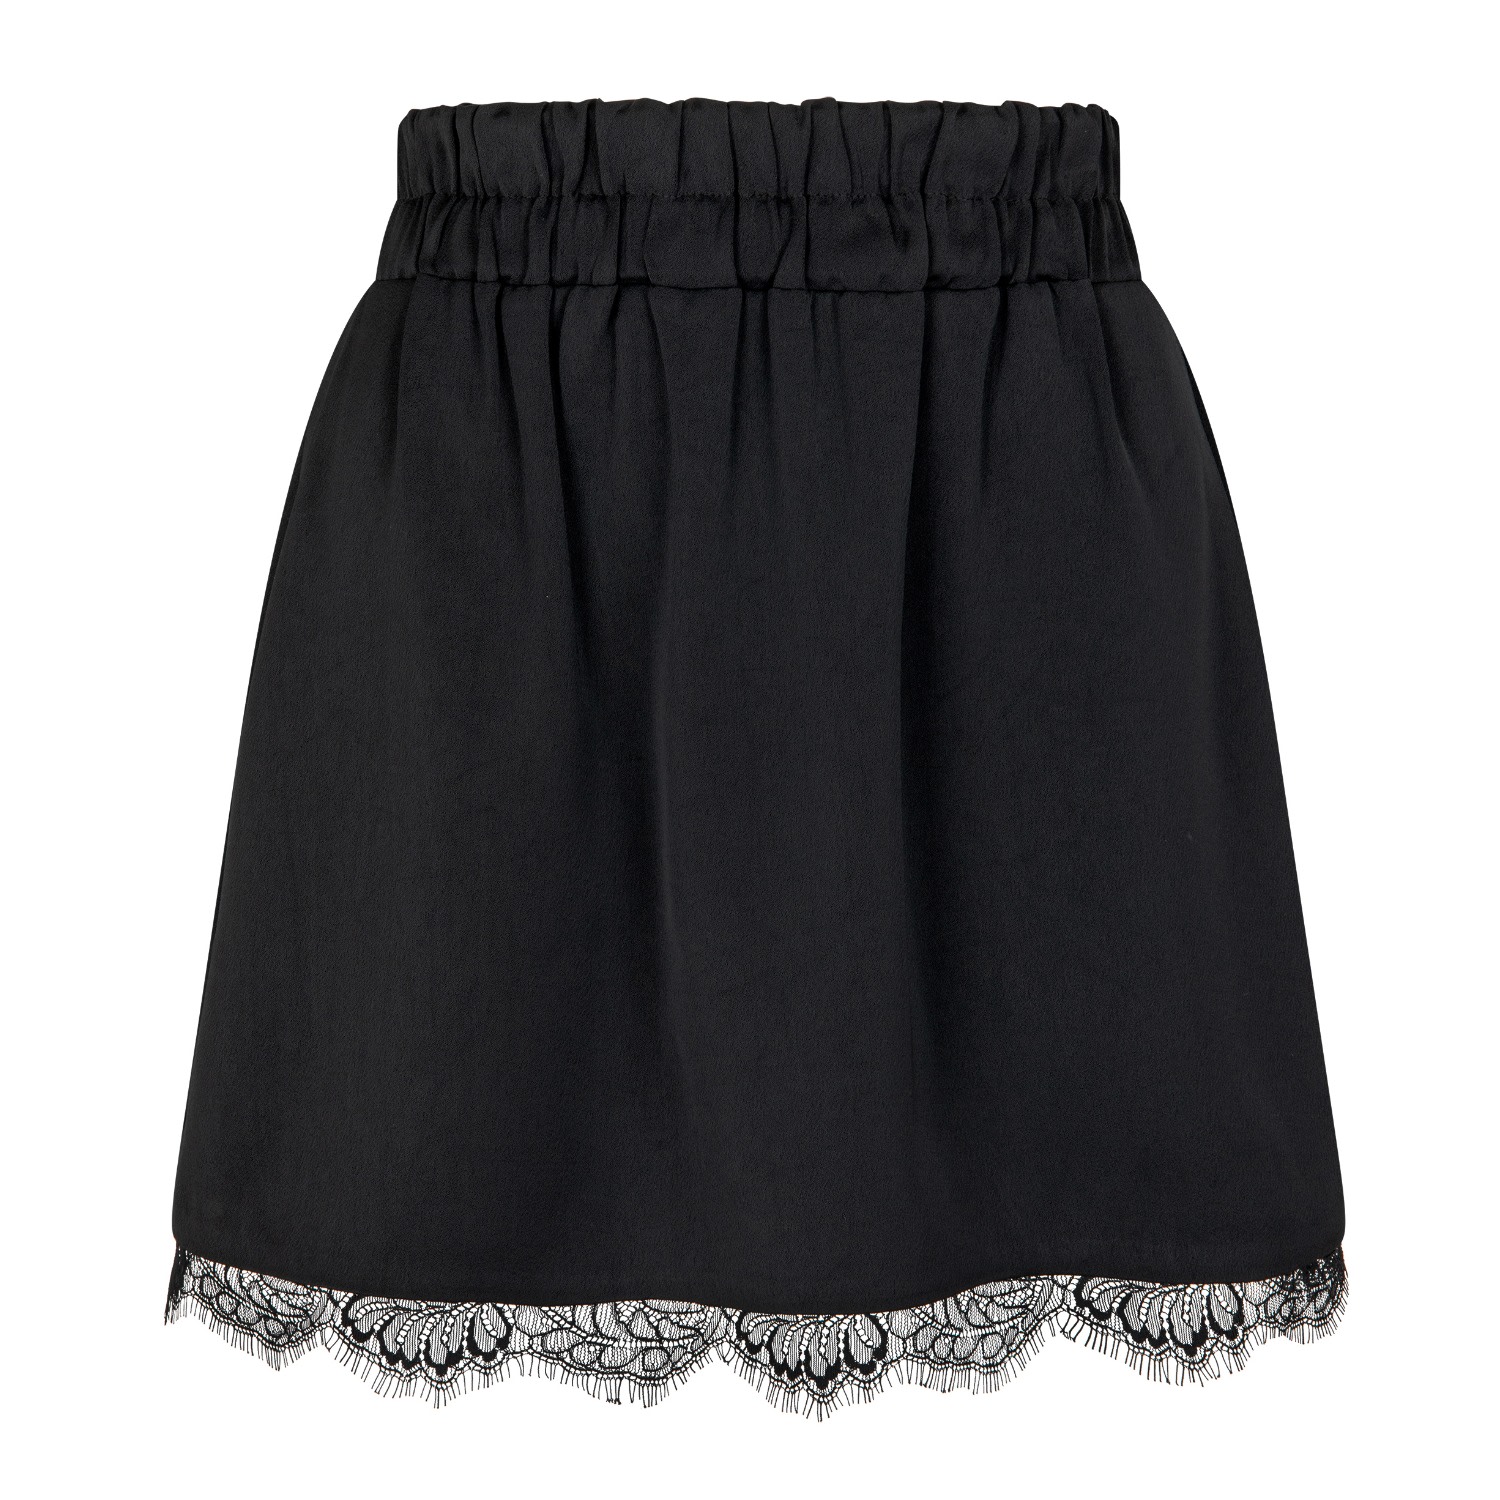 Women’s Black Embroidered Lace Mini Skirt Xs/S Langner